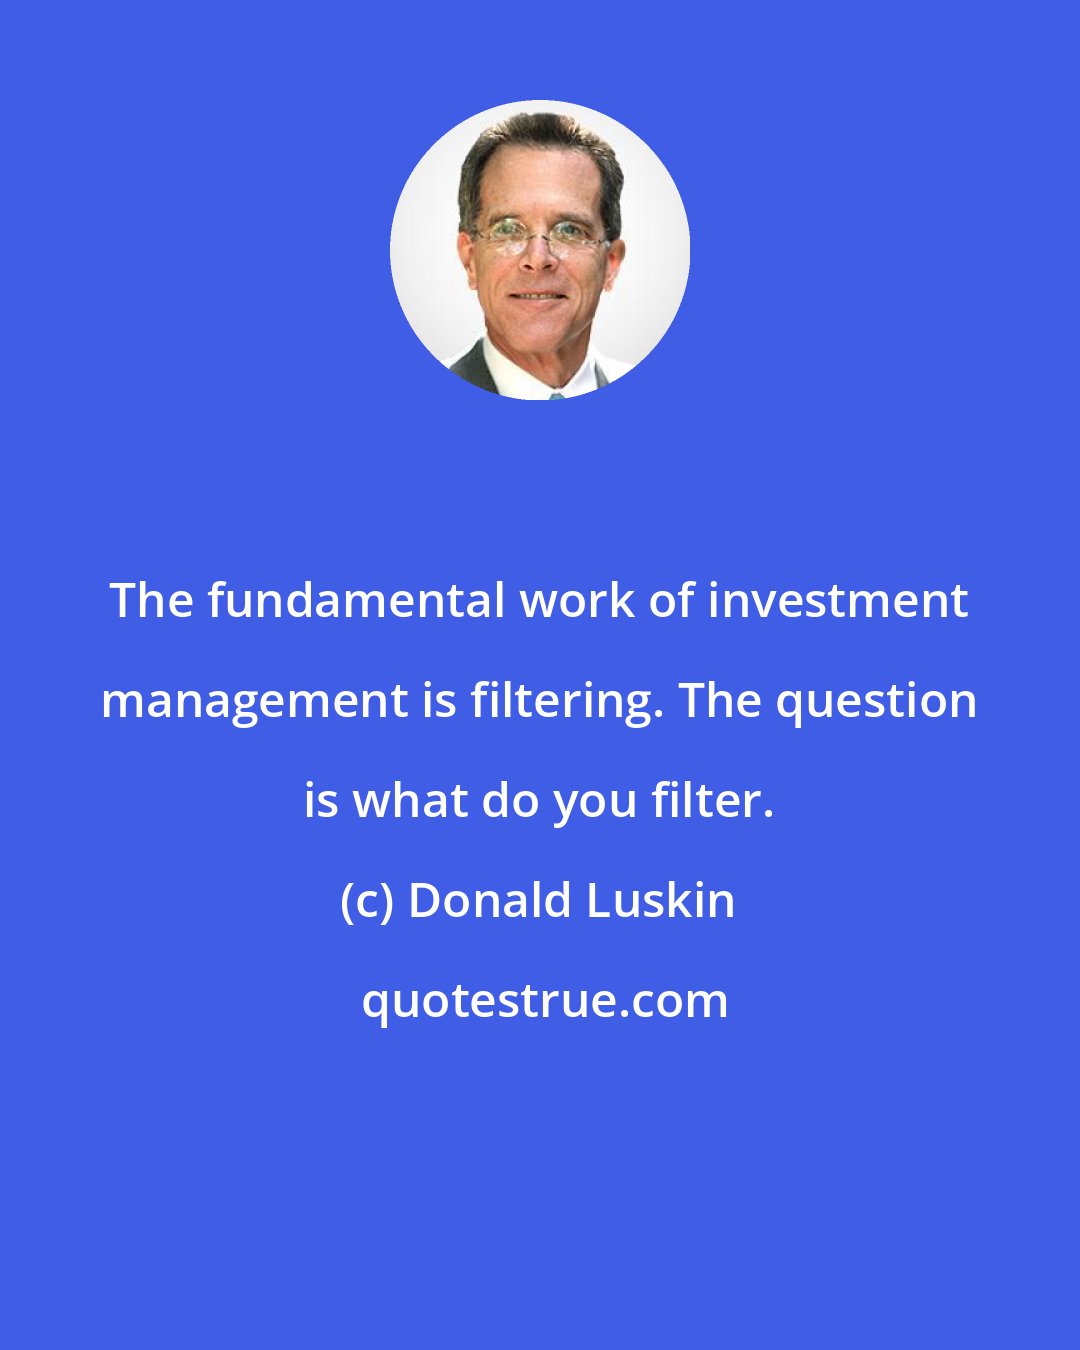 Donald Luskin: The fundamental work of investment management is filtering. The question is what do you filter.